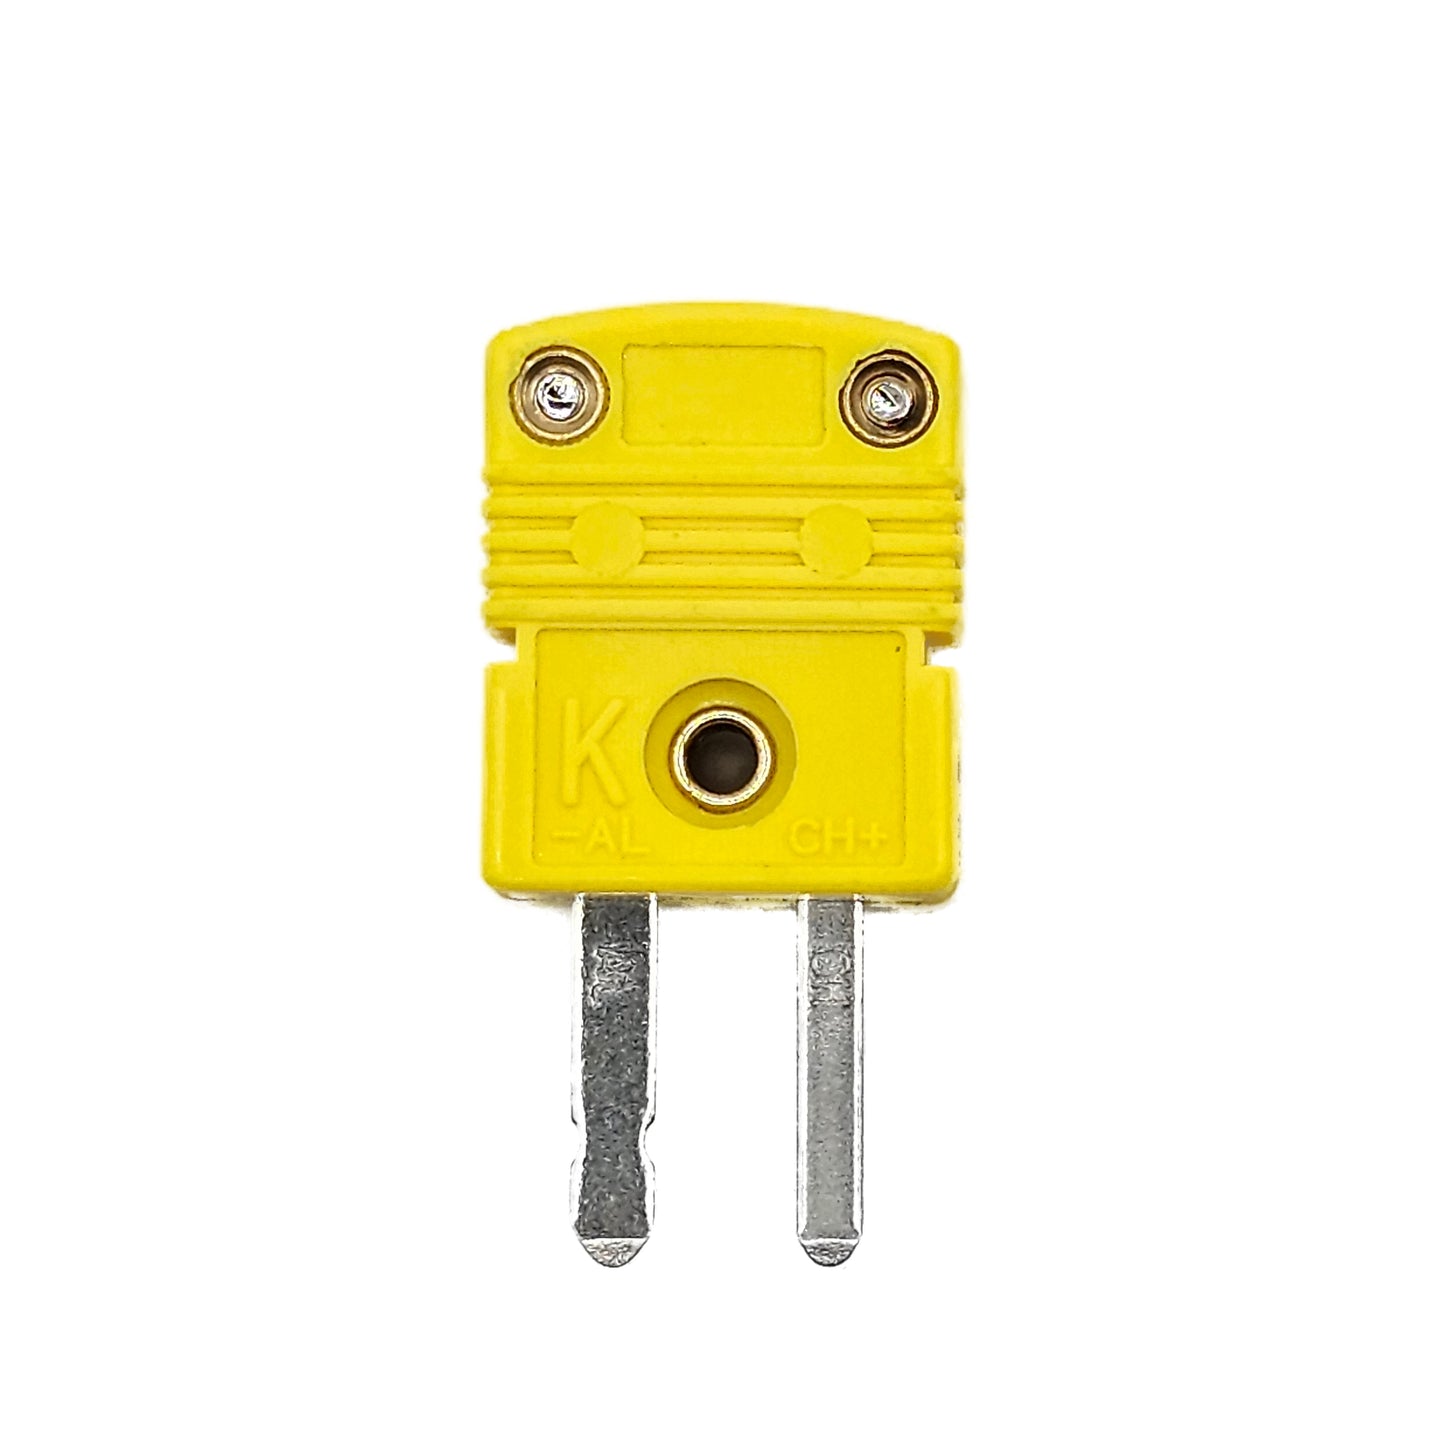 Type K Mini Thermocouple Connector, Omega Style - Male